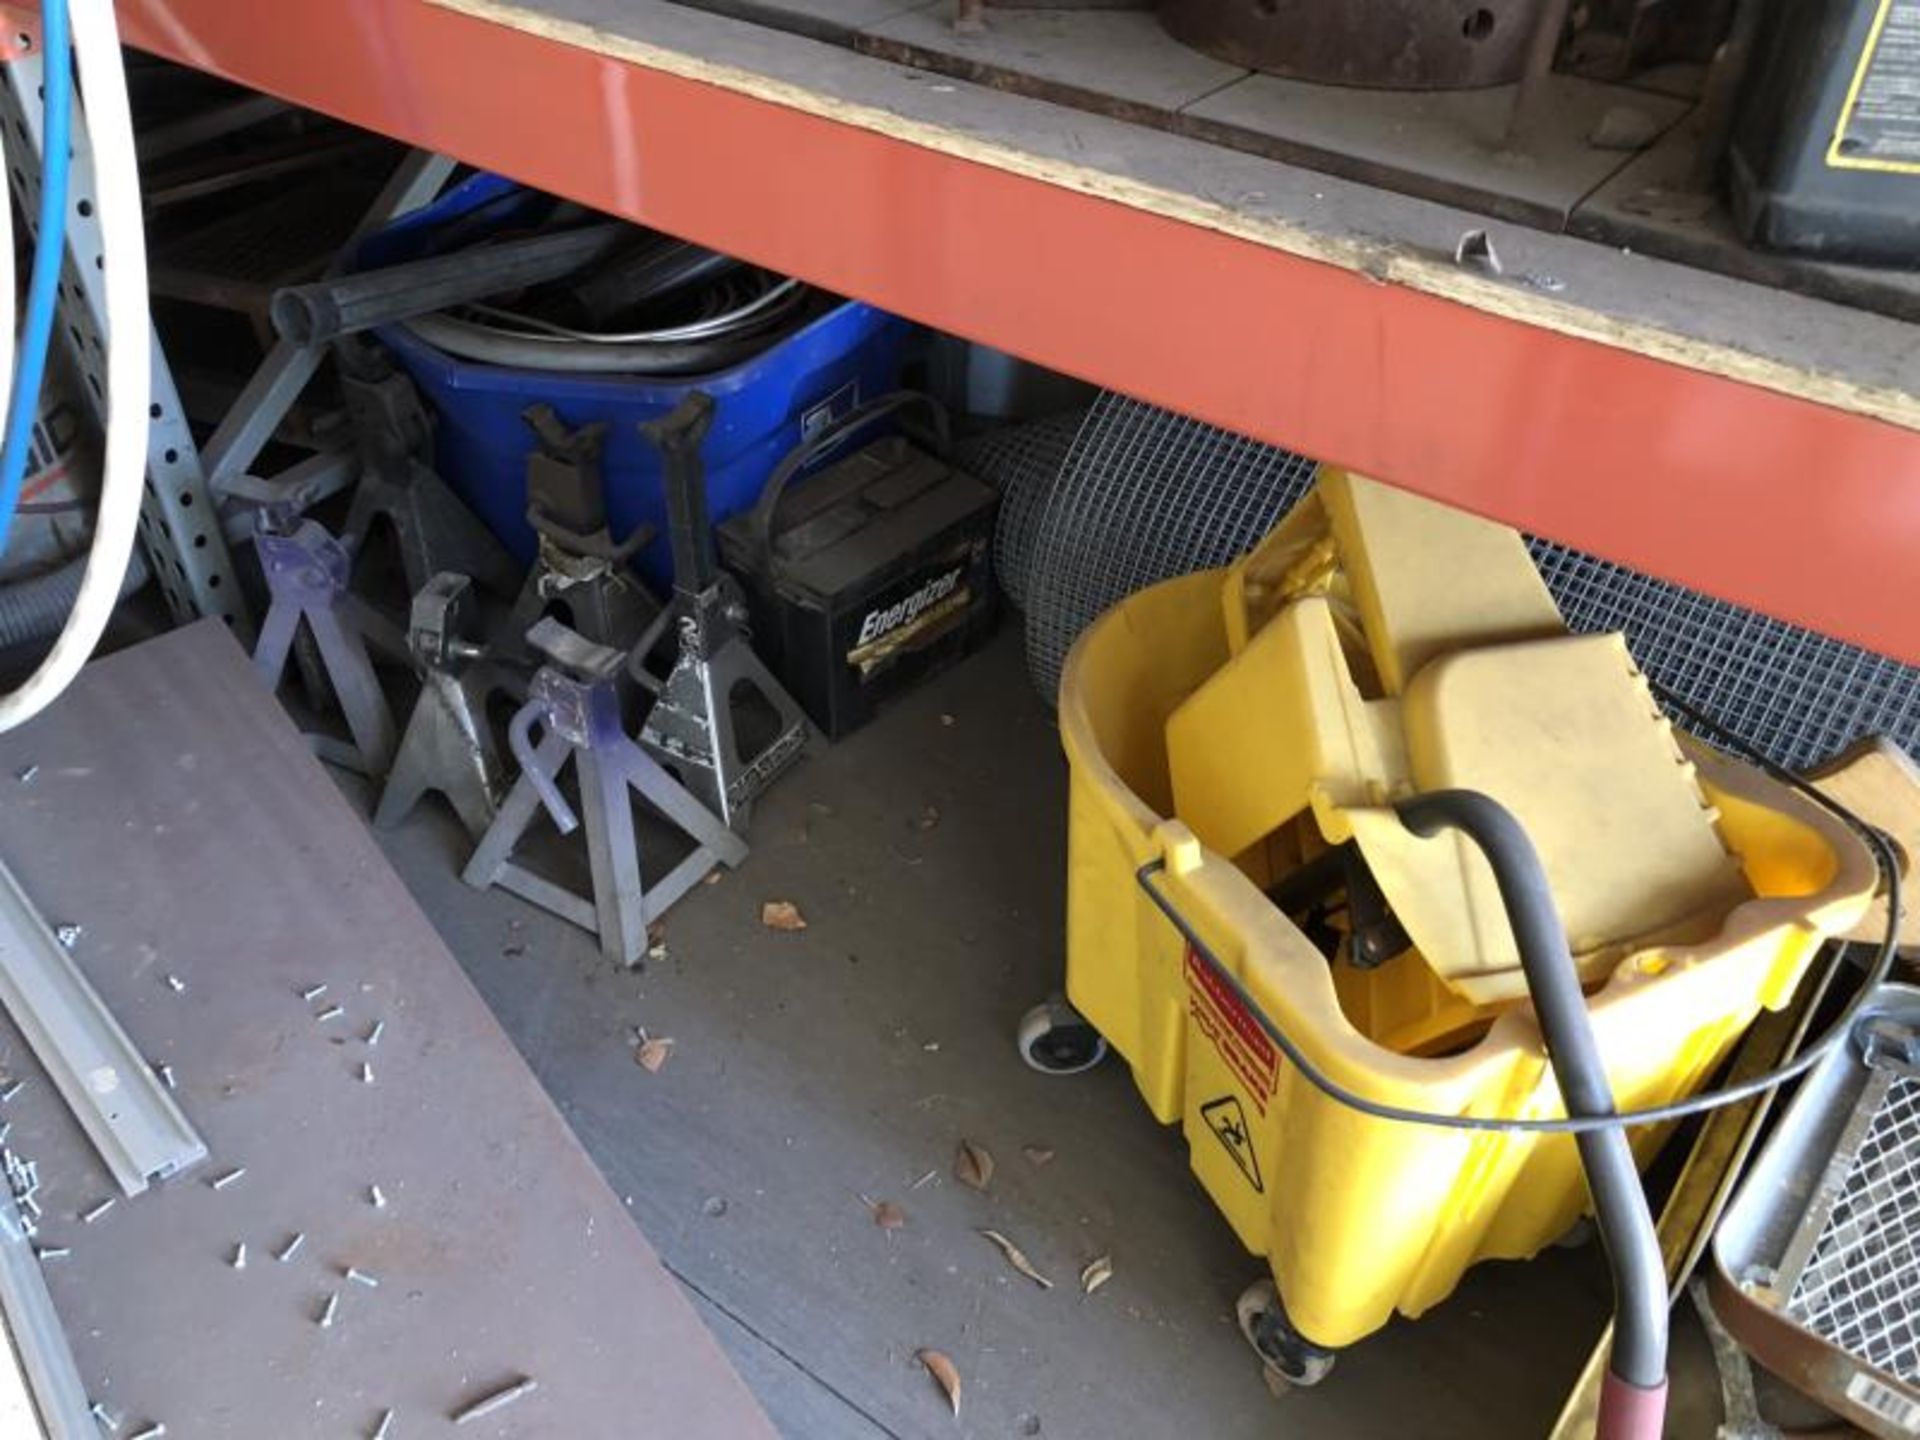 Contents of containe 2 section pallet racking, Sptop vac, jack stand, mop bucket, chicken wire, - Image 6 of 11